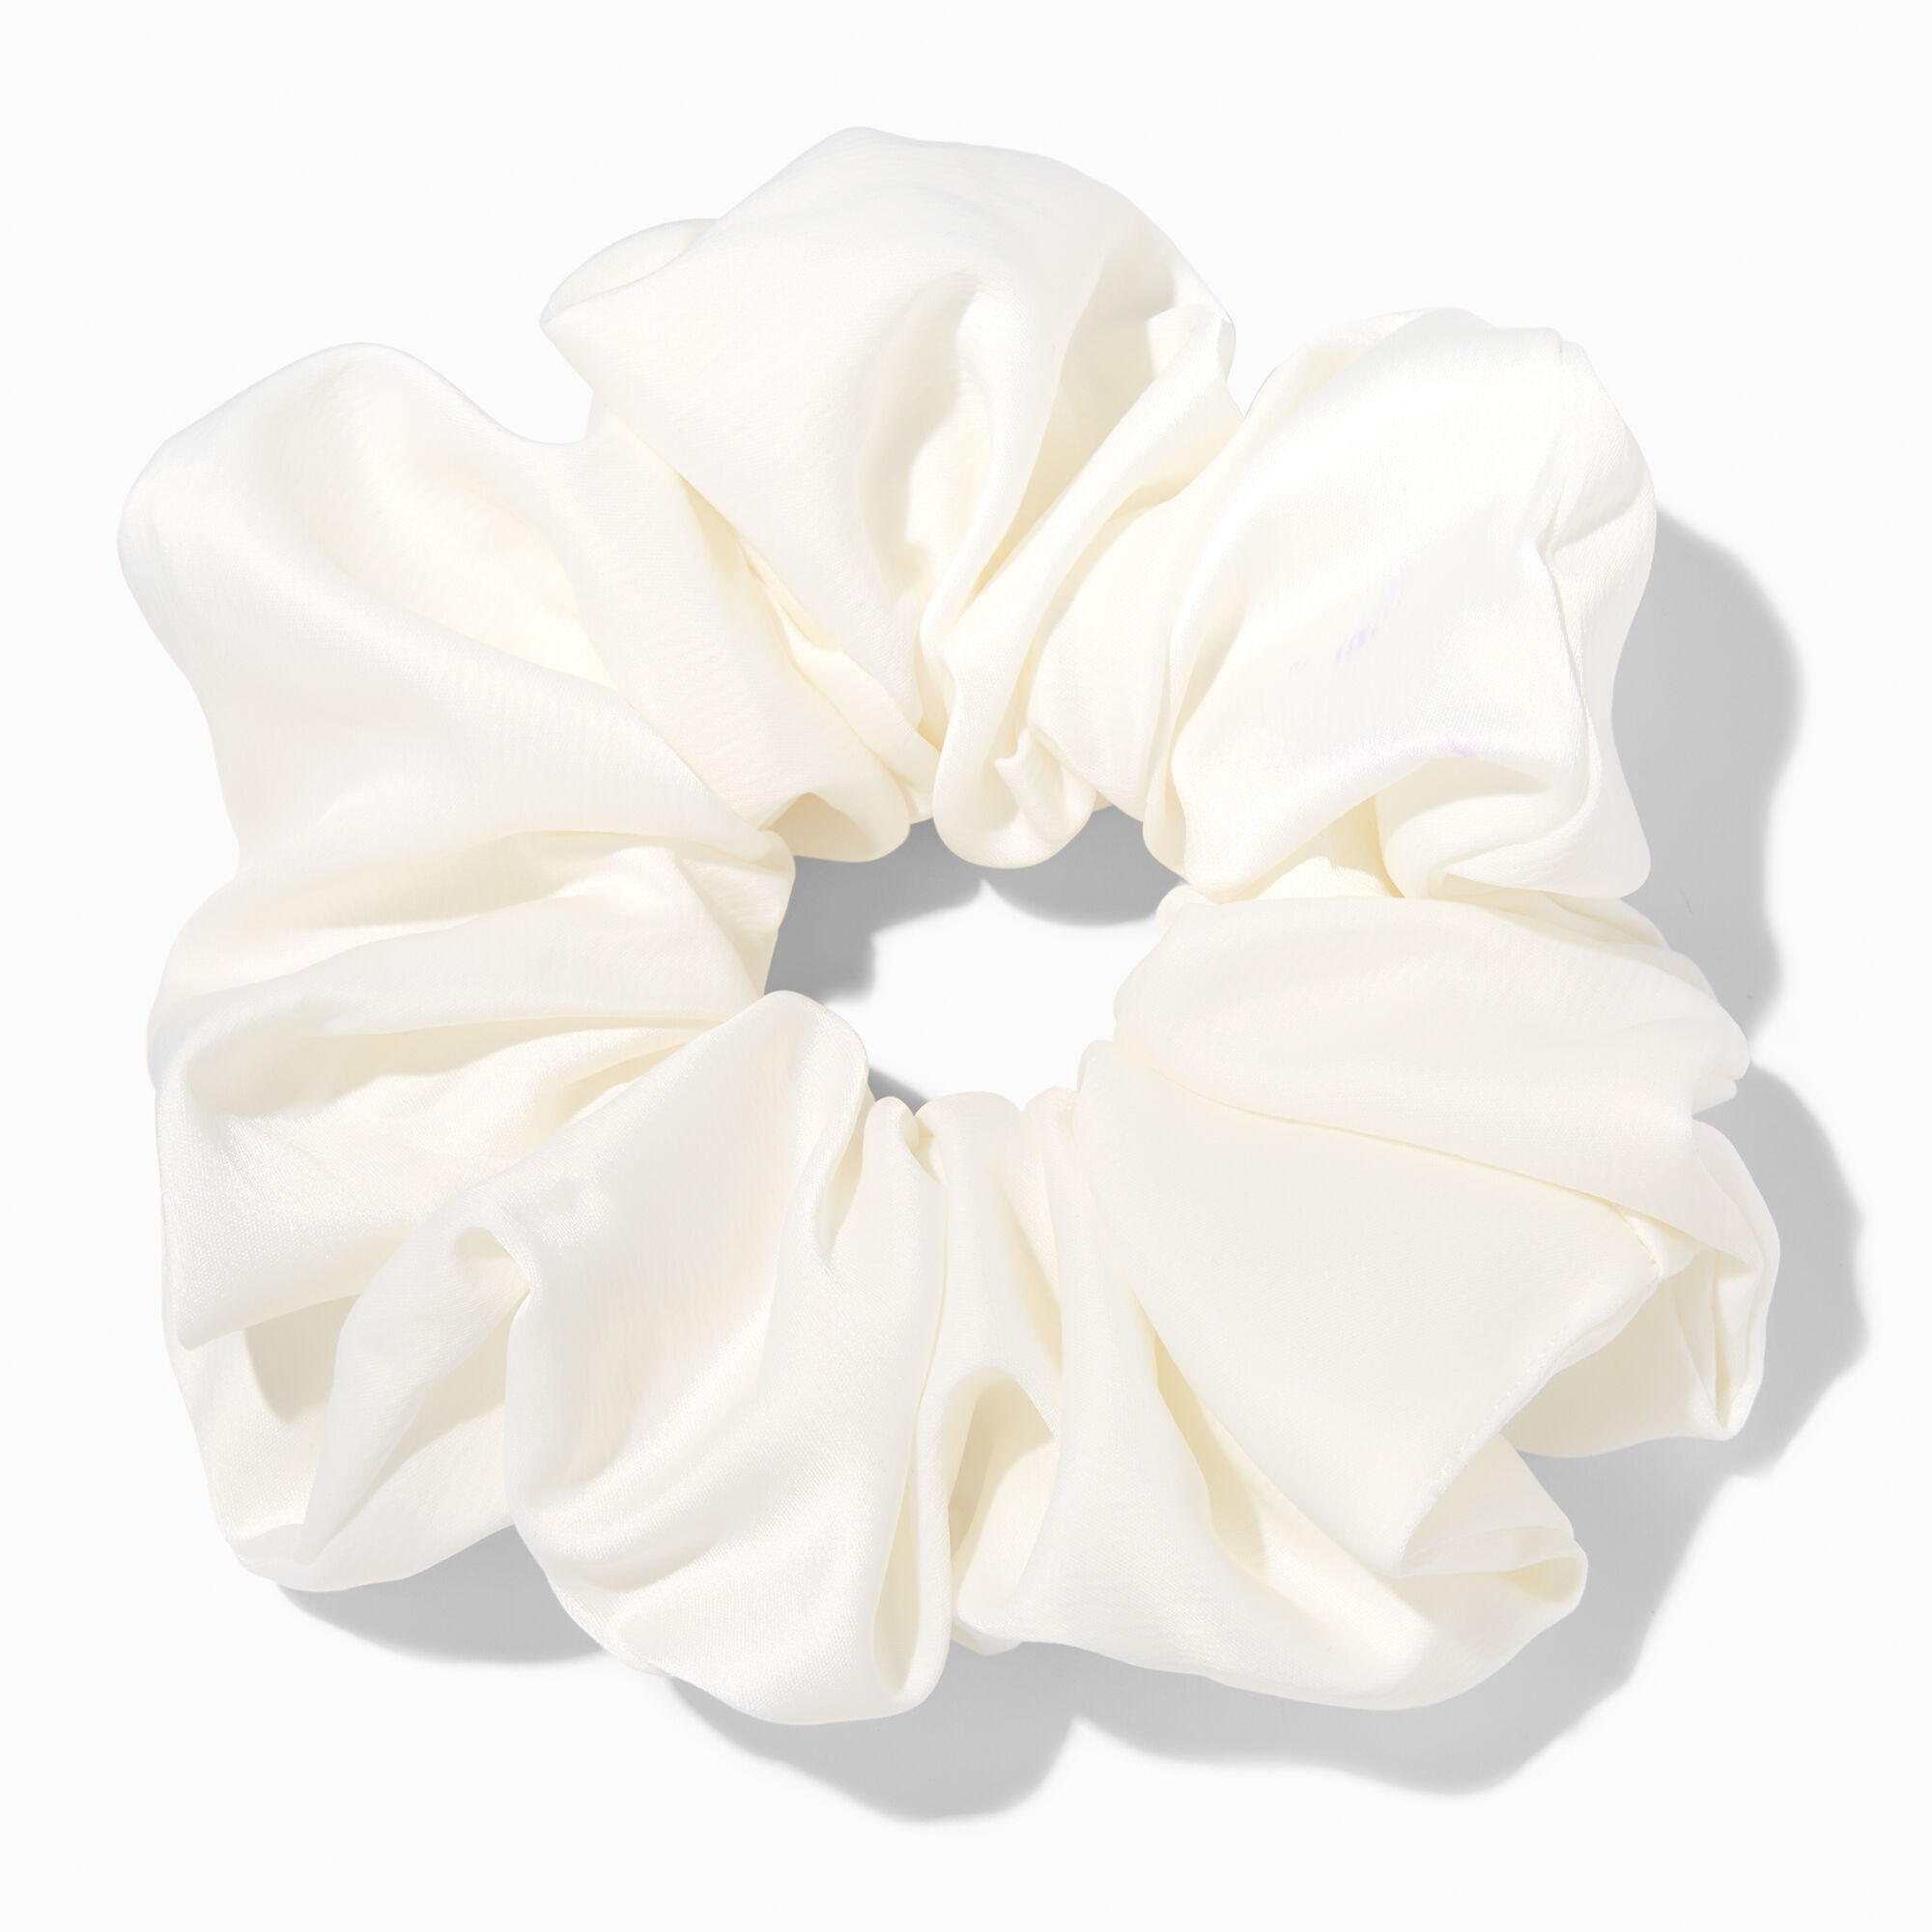 View Claires Giant Silky Hair Scrunchie Bracelet White information